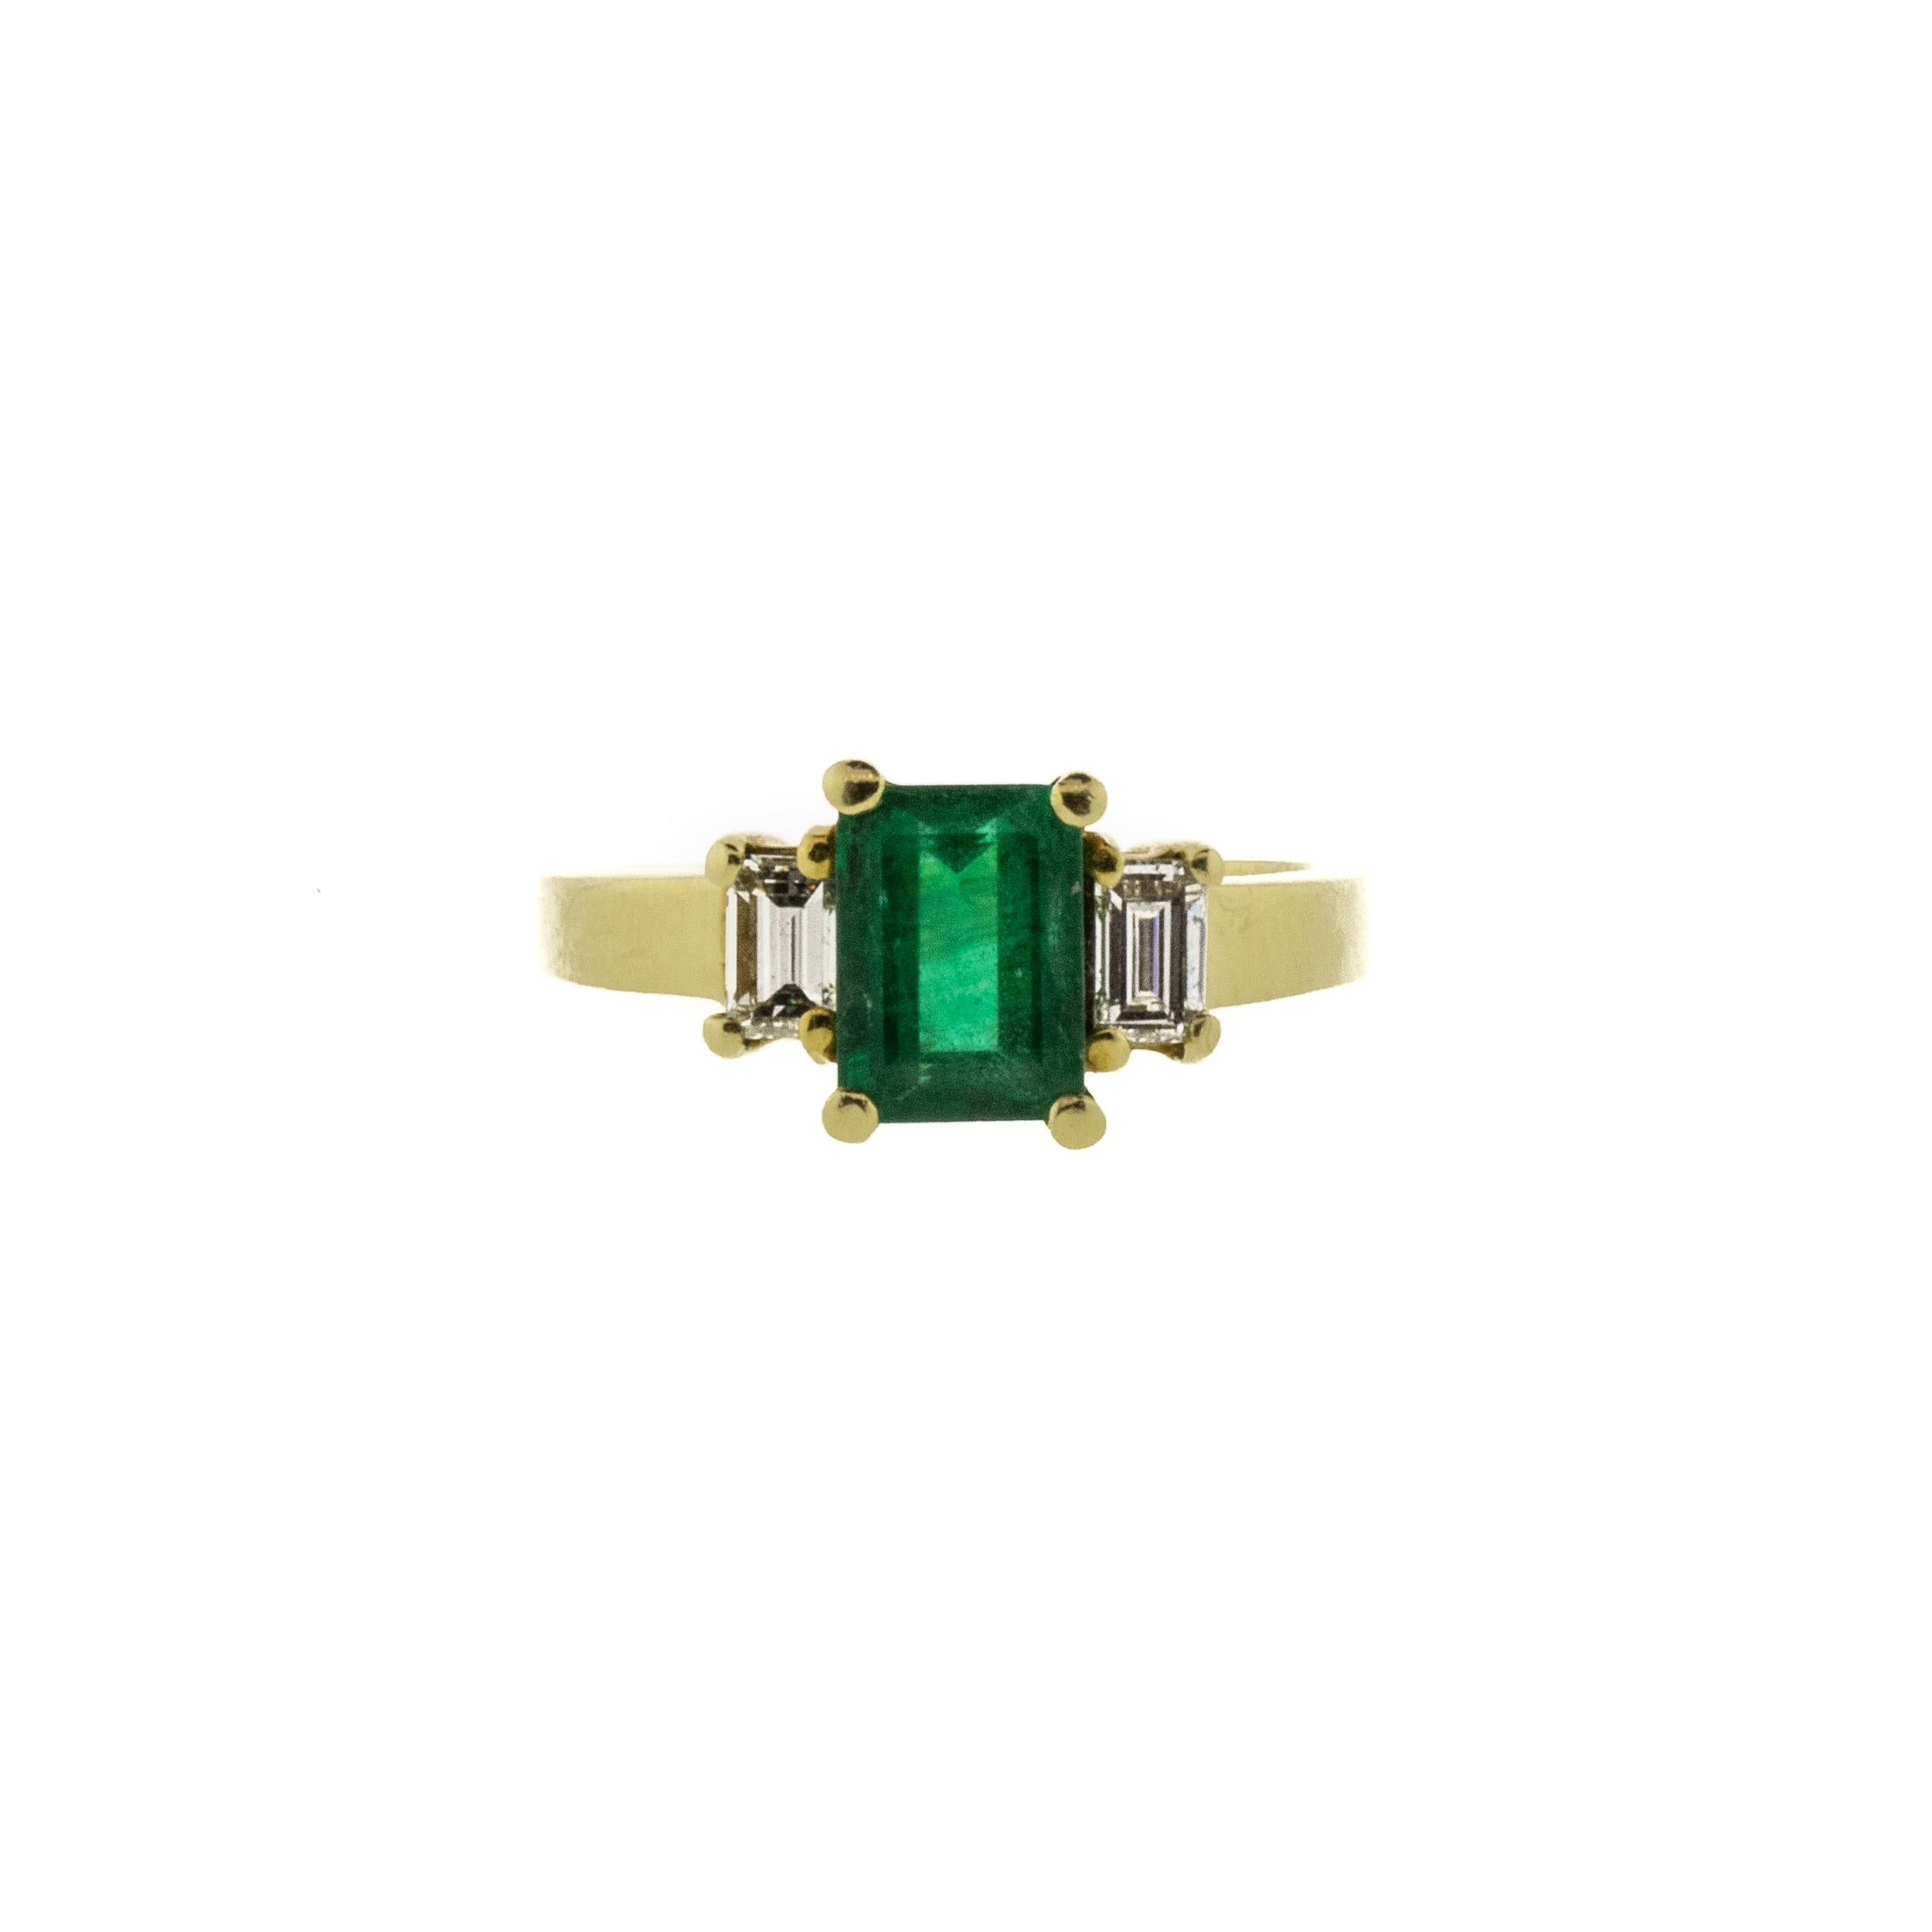 A deep forest green 1.40 carat Zambian emerald takes center stage in this unique vintage ring. Flanked by two .25ct G-H/VS straight baguette natural diamonds, the traditional emerald-cut center and oversized prongs give this ring a geometric